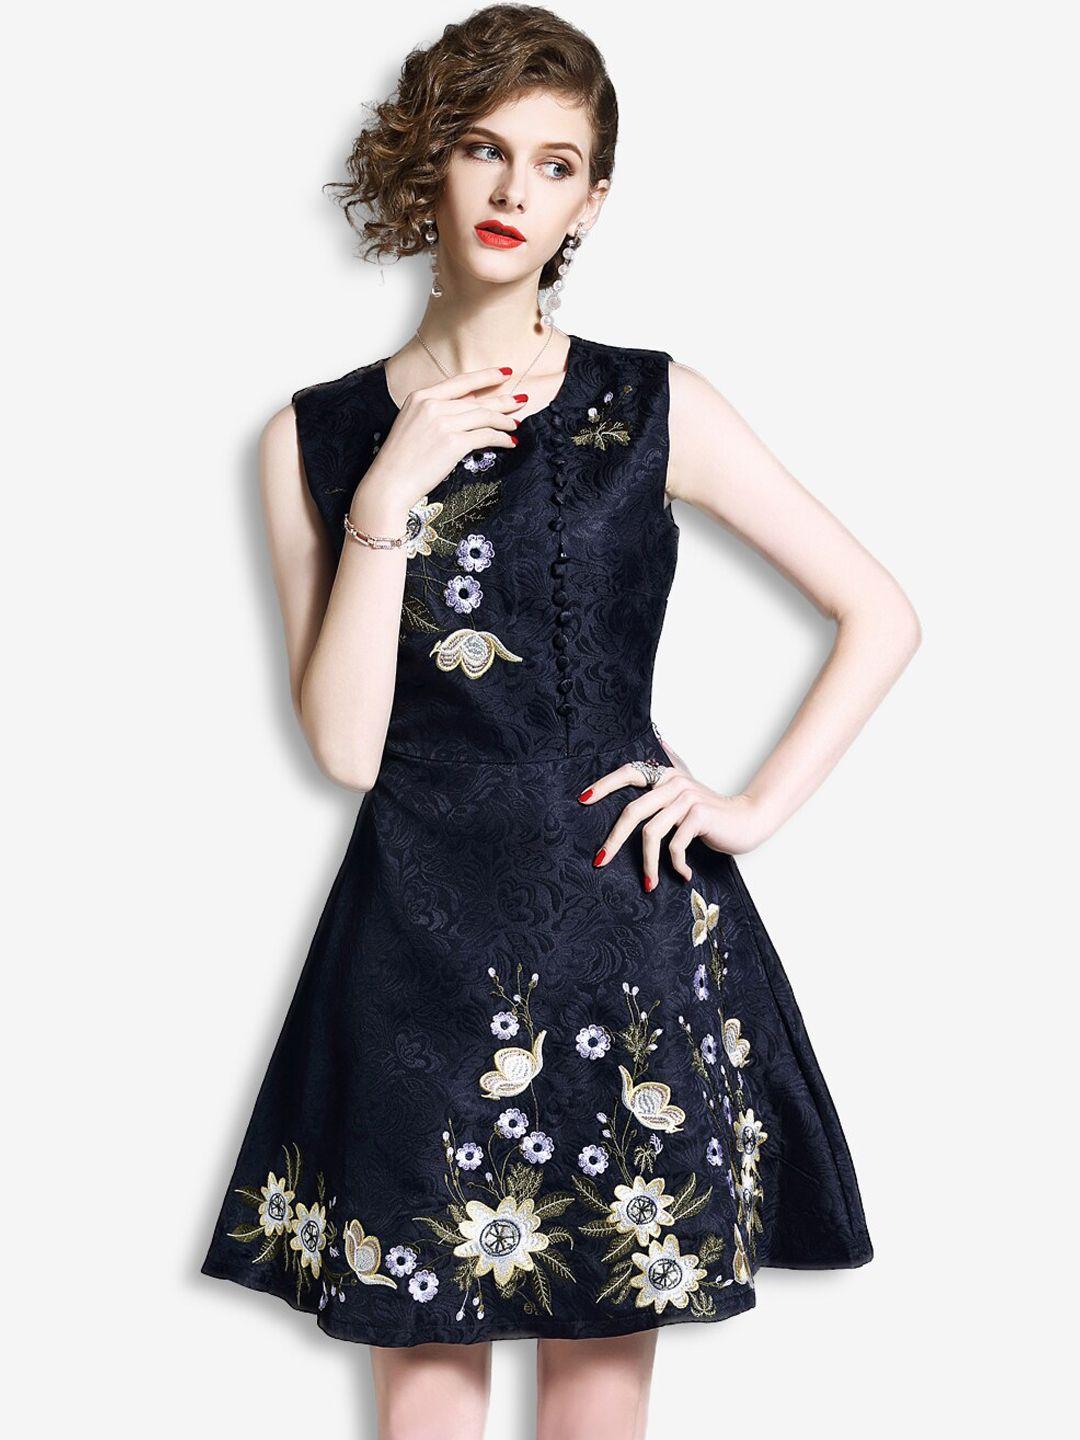 jc collection navy blue & white floral embroidered sheath dress